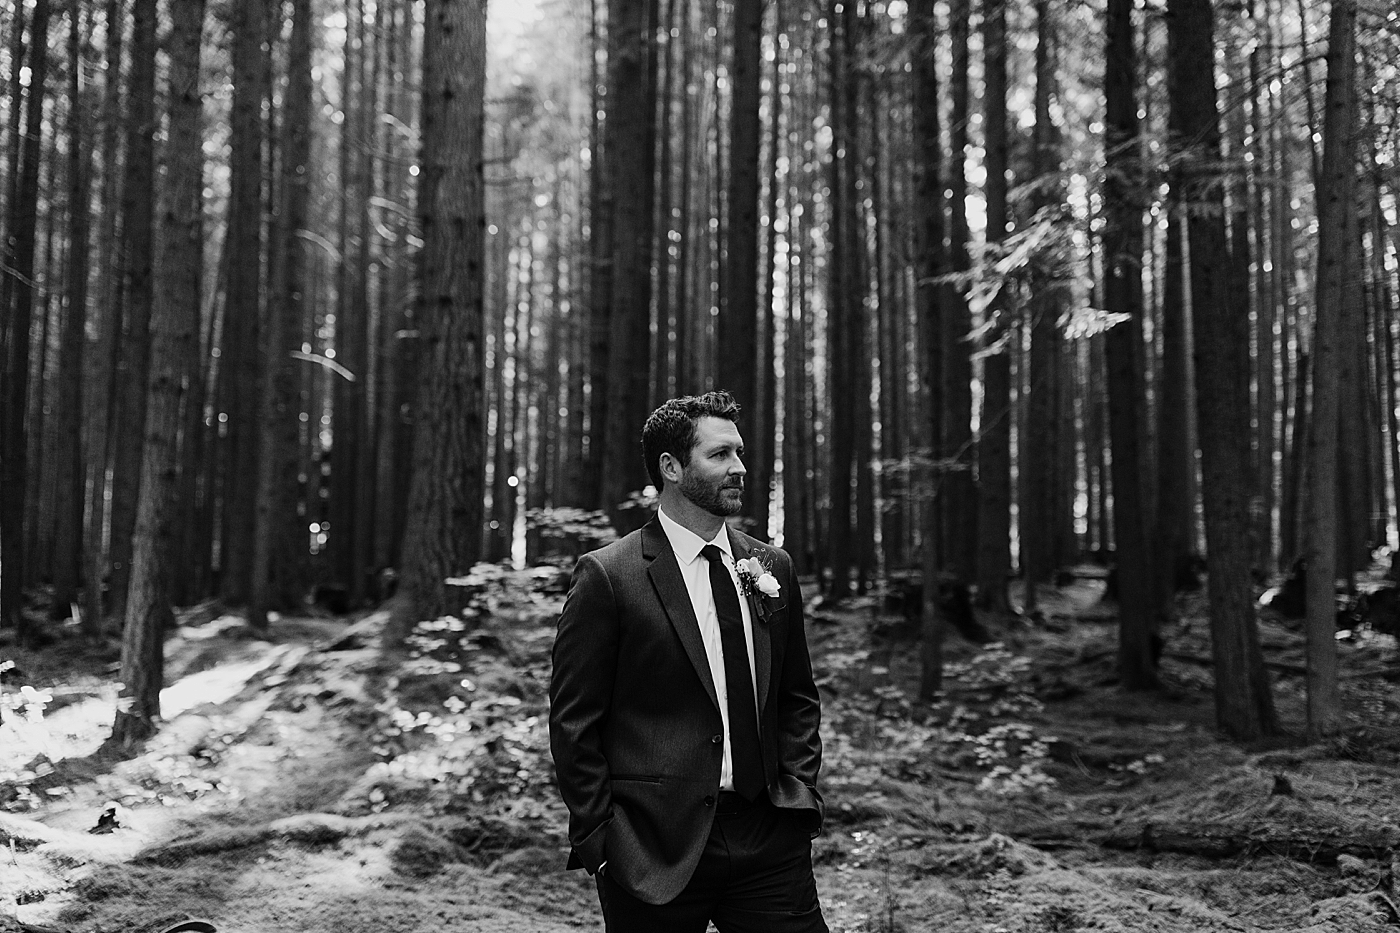 Grooms portraits at intimate elopement ceremony. Photographed by PNW Elopement Photographer, Megan Montalvo Photography. 